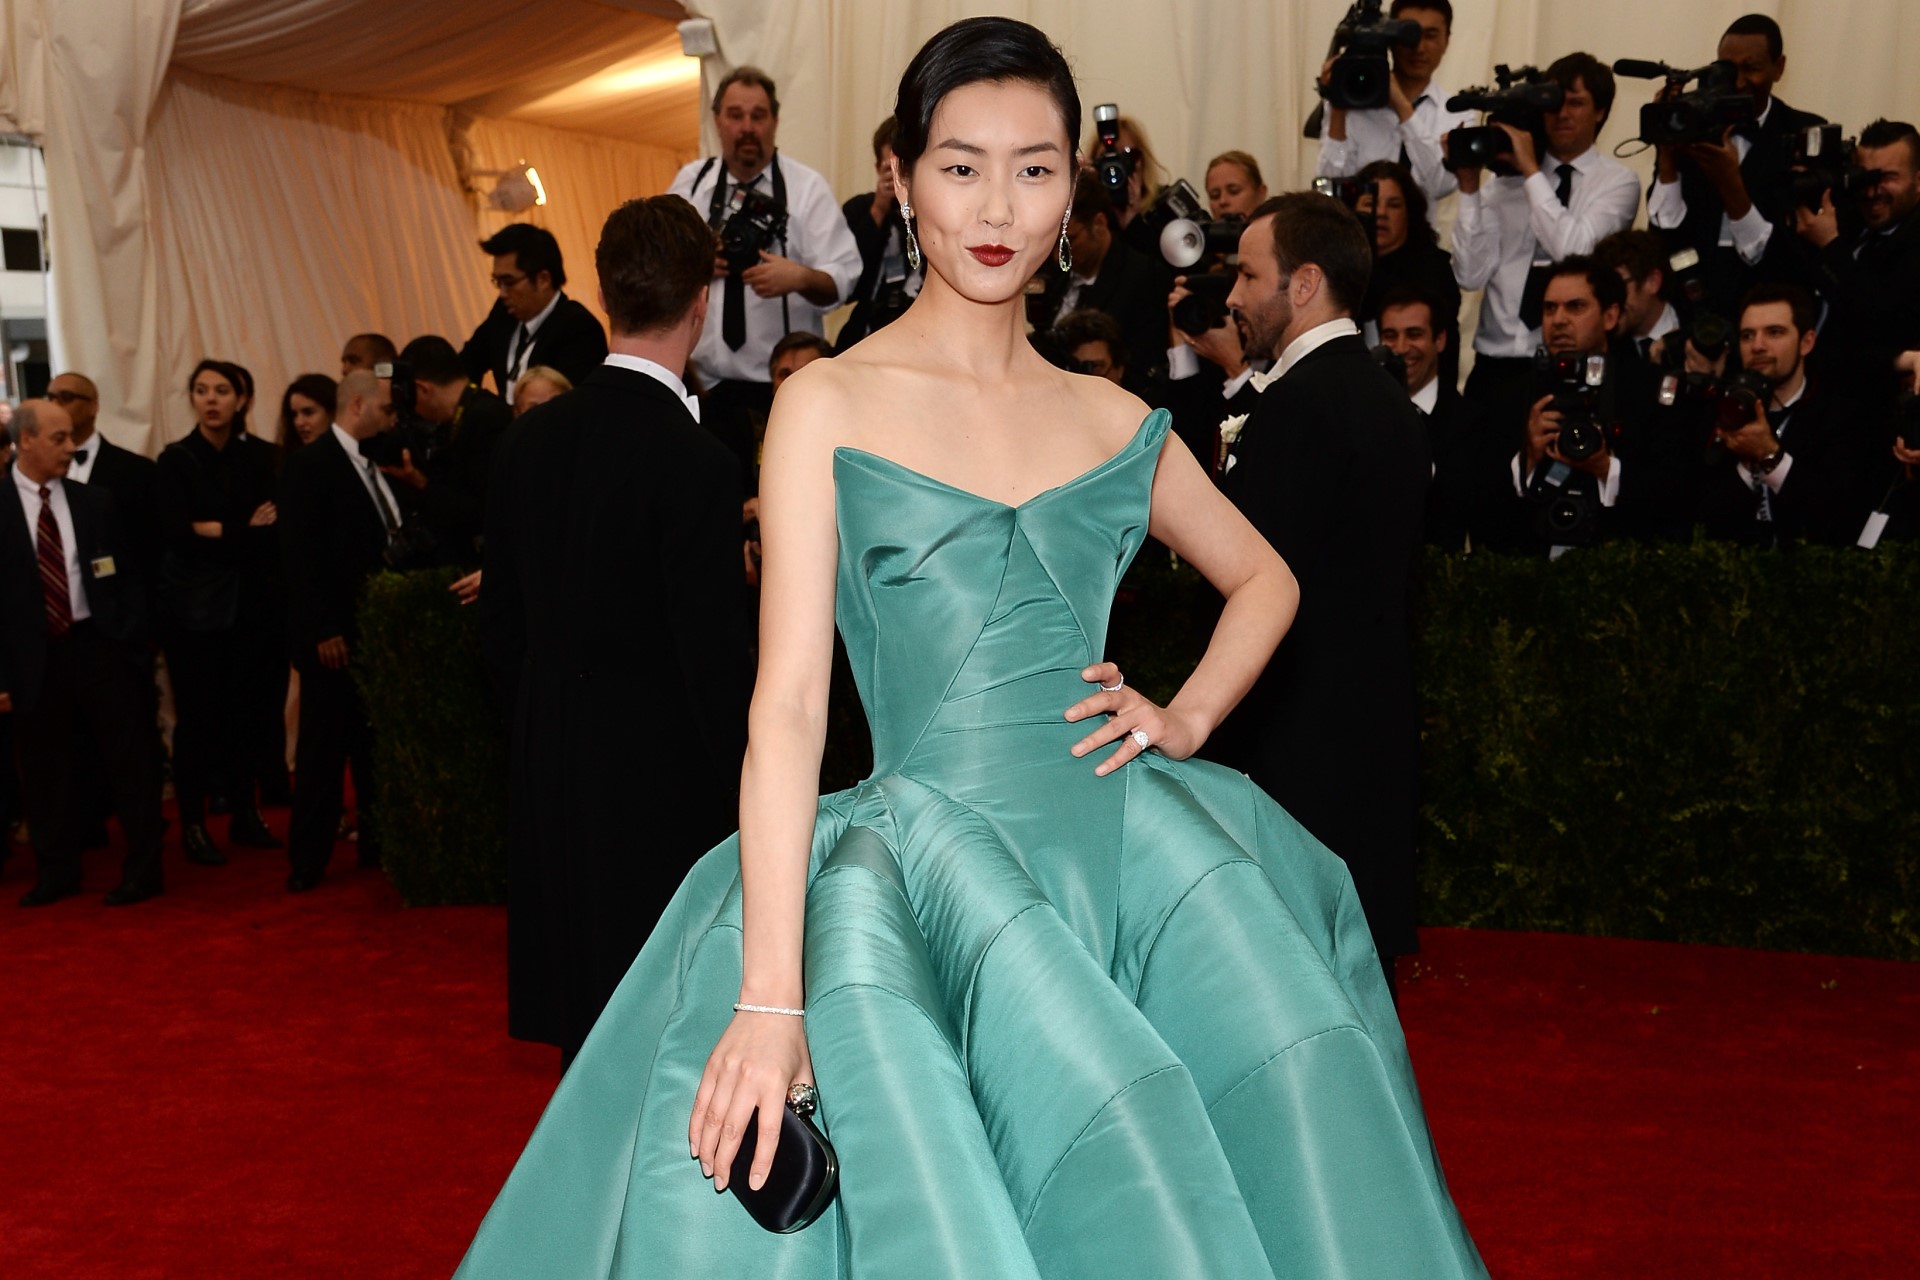 <p>Liu Wen, born in 1988 and hailing from China, not only graced the catwalks for top designers but also made history as the first Asian model to walk for Victoria's Secret.</p> <p>Net worth: $40 million</p>